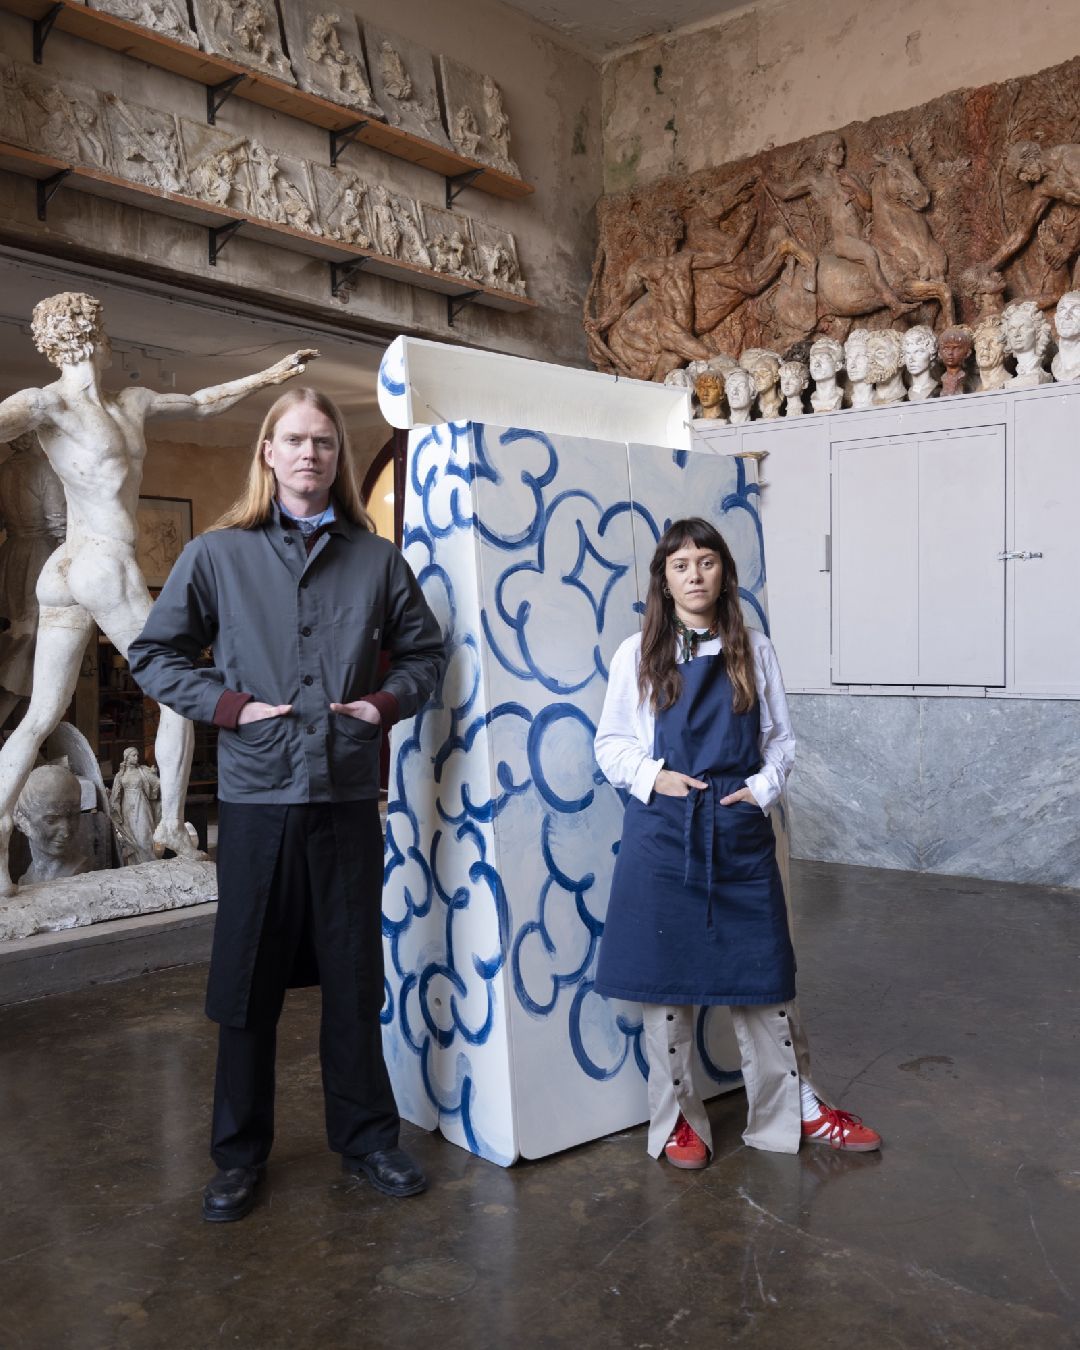 OLDER Studio take 'Buclicolo' to Design Week An endless creative process filmed in four parts